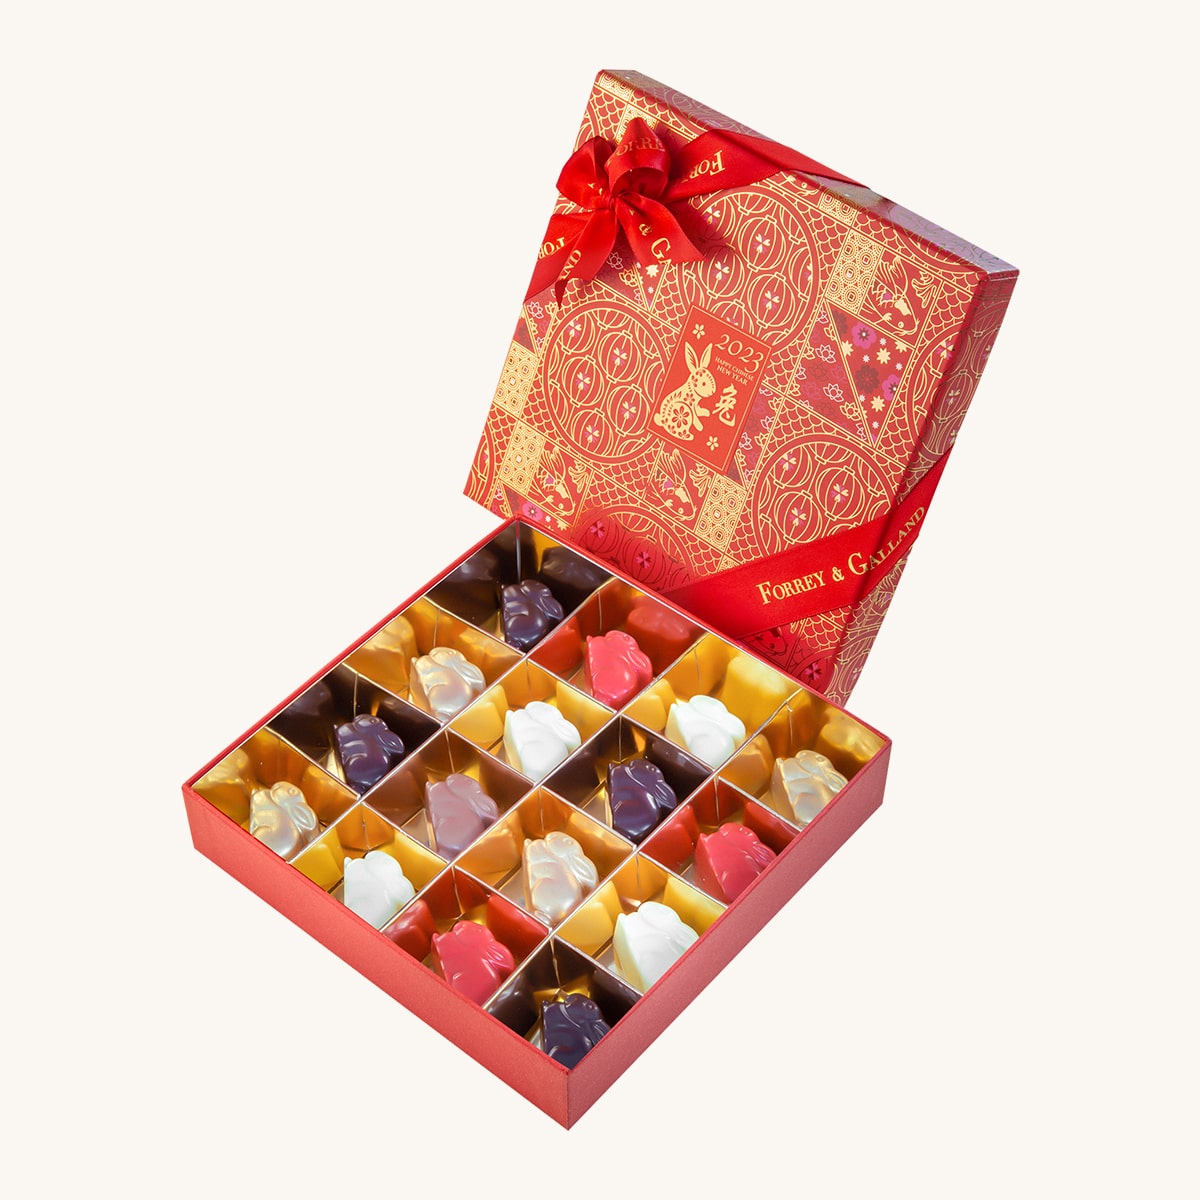 exclusive box for chinese new year containing a special set of rabbit chocolates